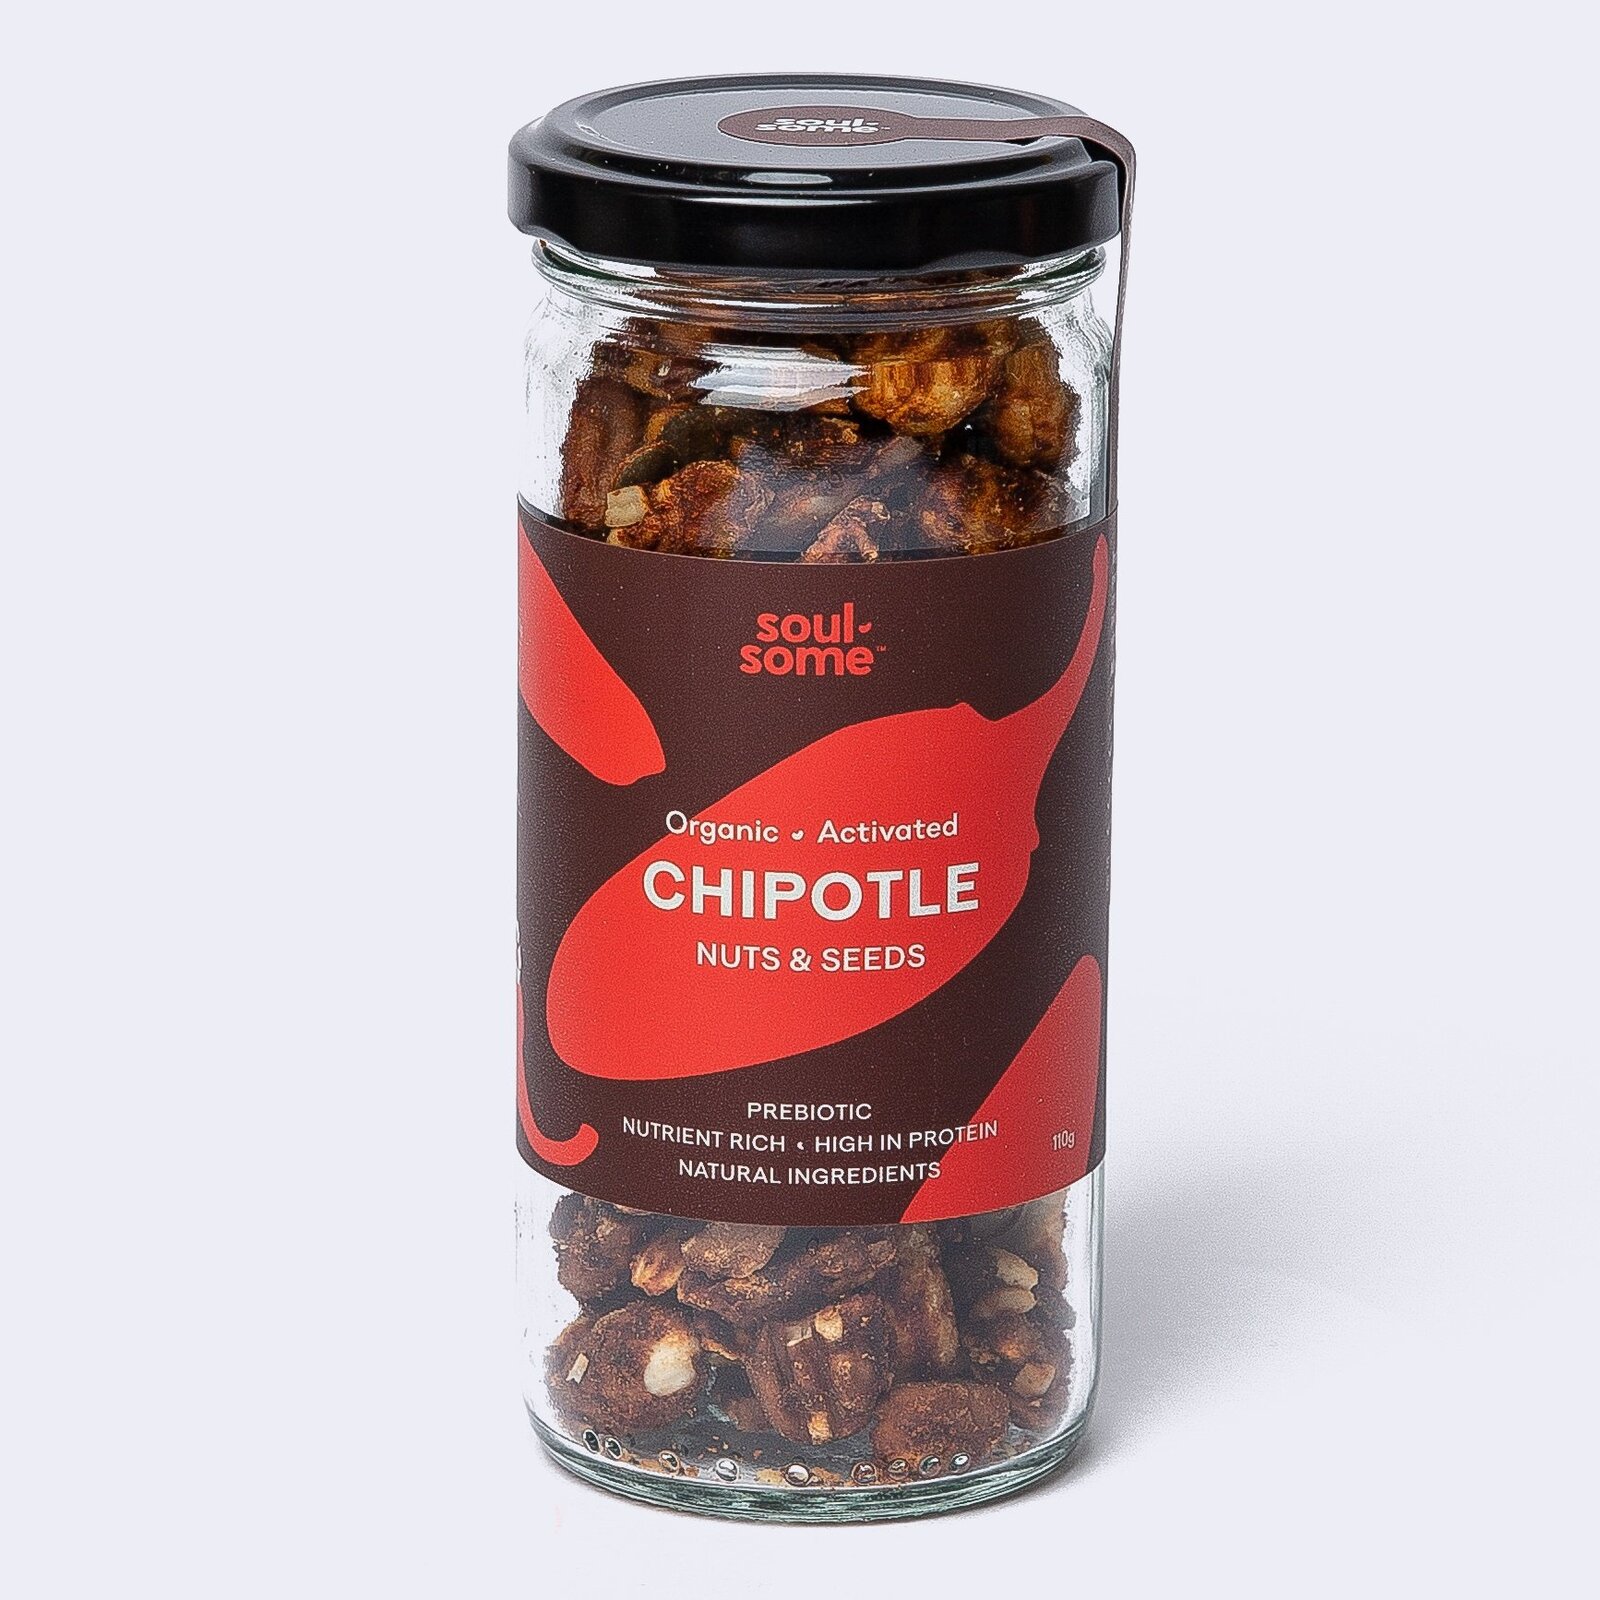 Chipotle nuts and seeds 110g